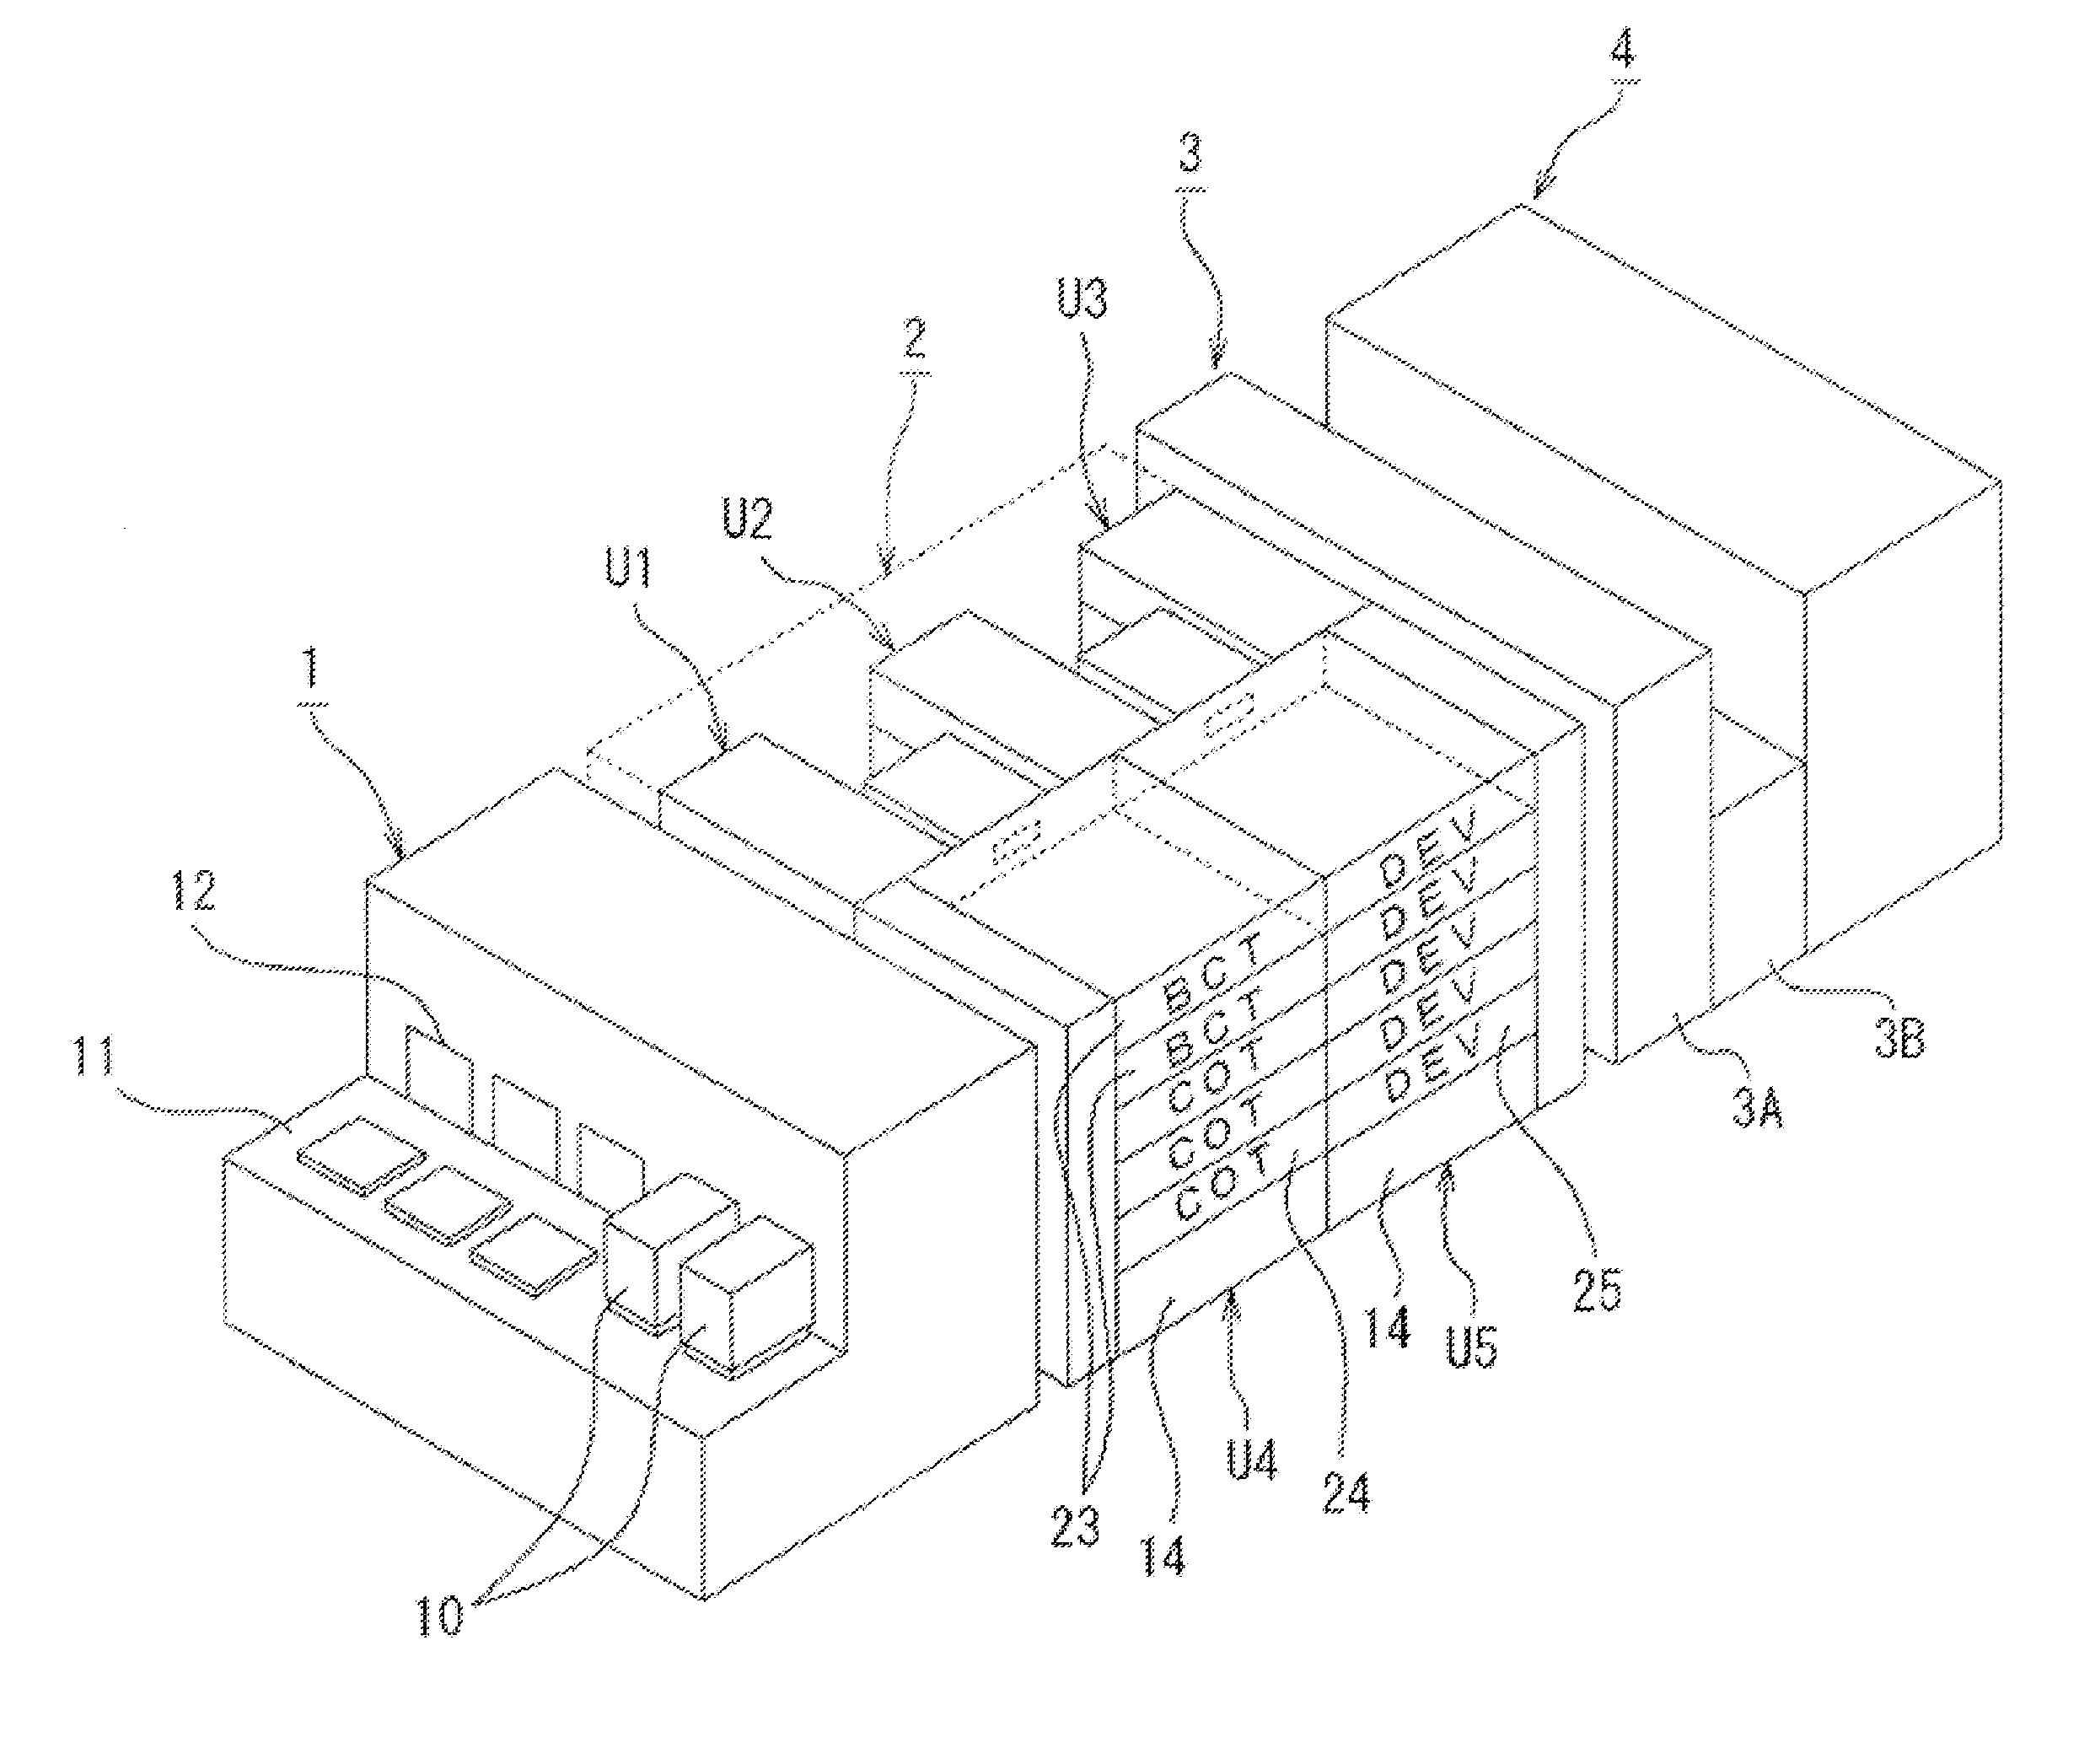 Method and apparatus for increased recirculation and filtration in a photoresist dispense system using a recirculation pump/loop